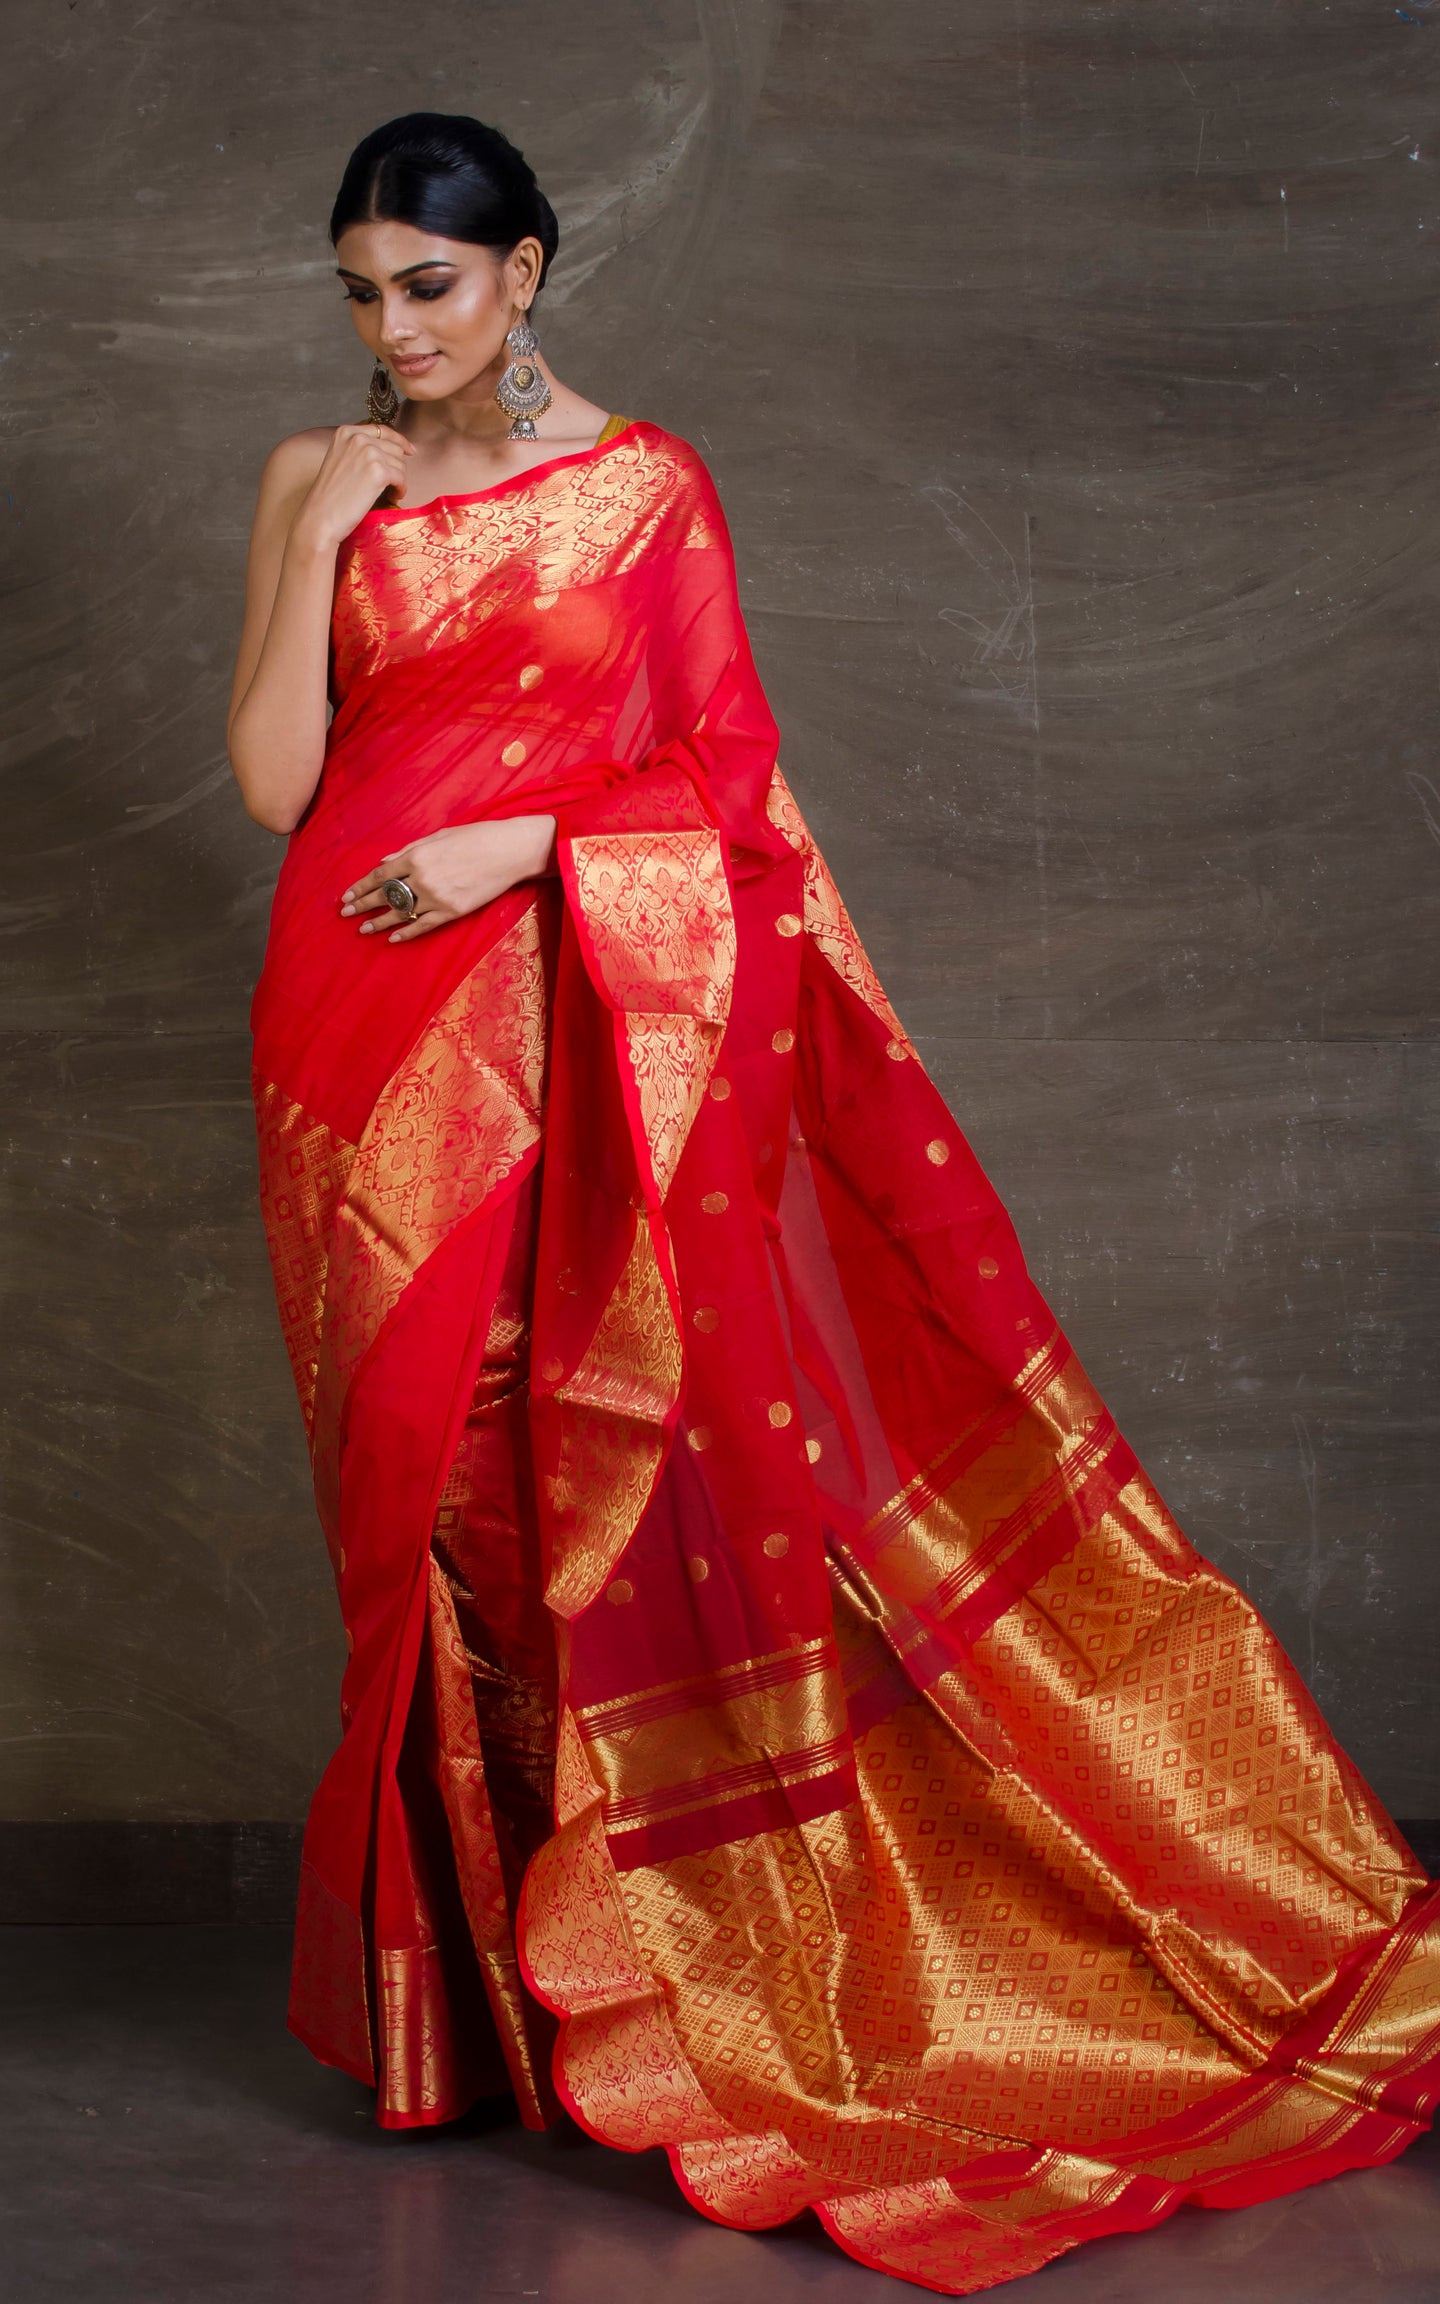 Bengal Handloom Tanchui Work  Patli Pallu Saree in Vermilion Red and Gold from Bengal Looms India